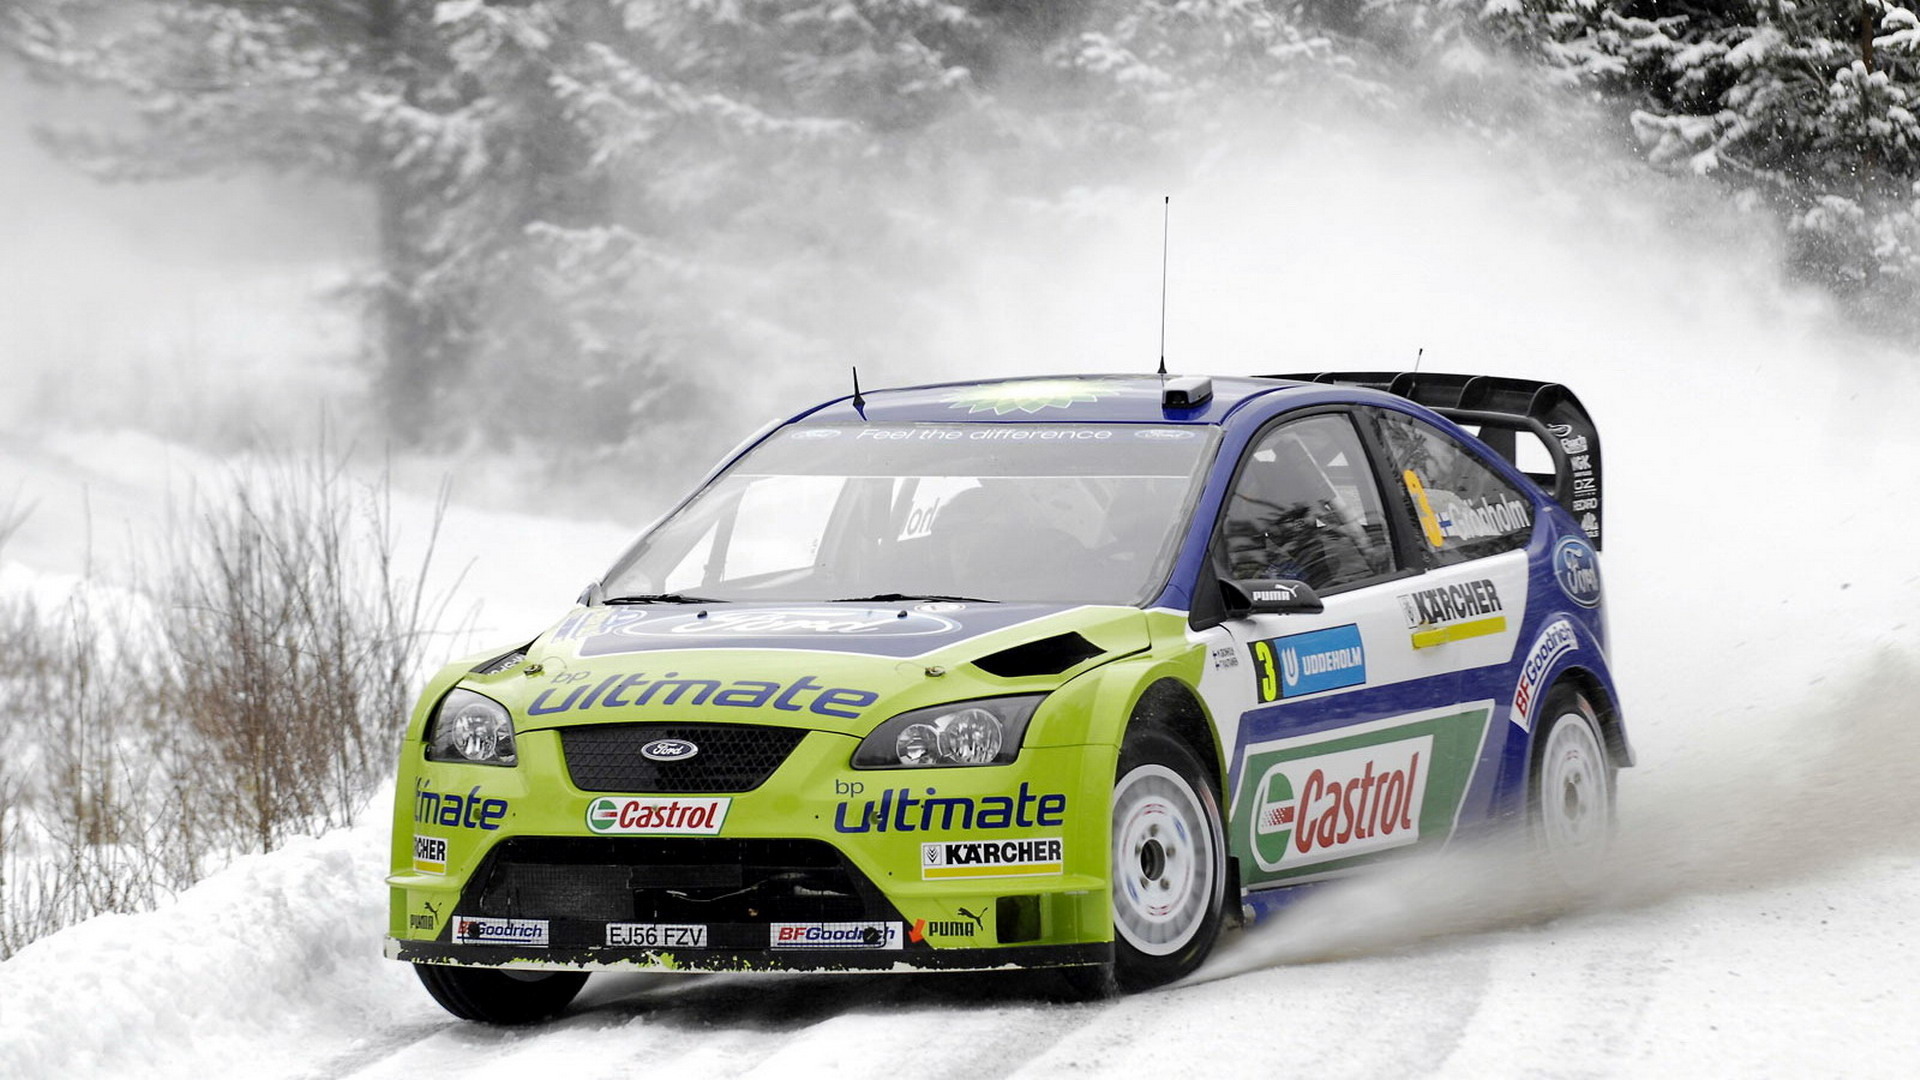 General 1920x1080 Ford car snow rally cars depth of field race cars vehicle Ford Focus livery motorsport British cars hatchbacks